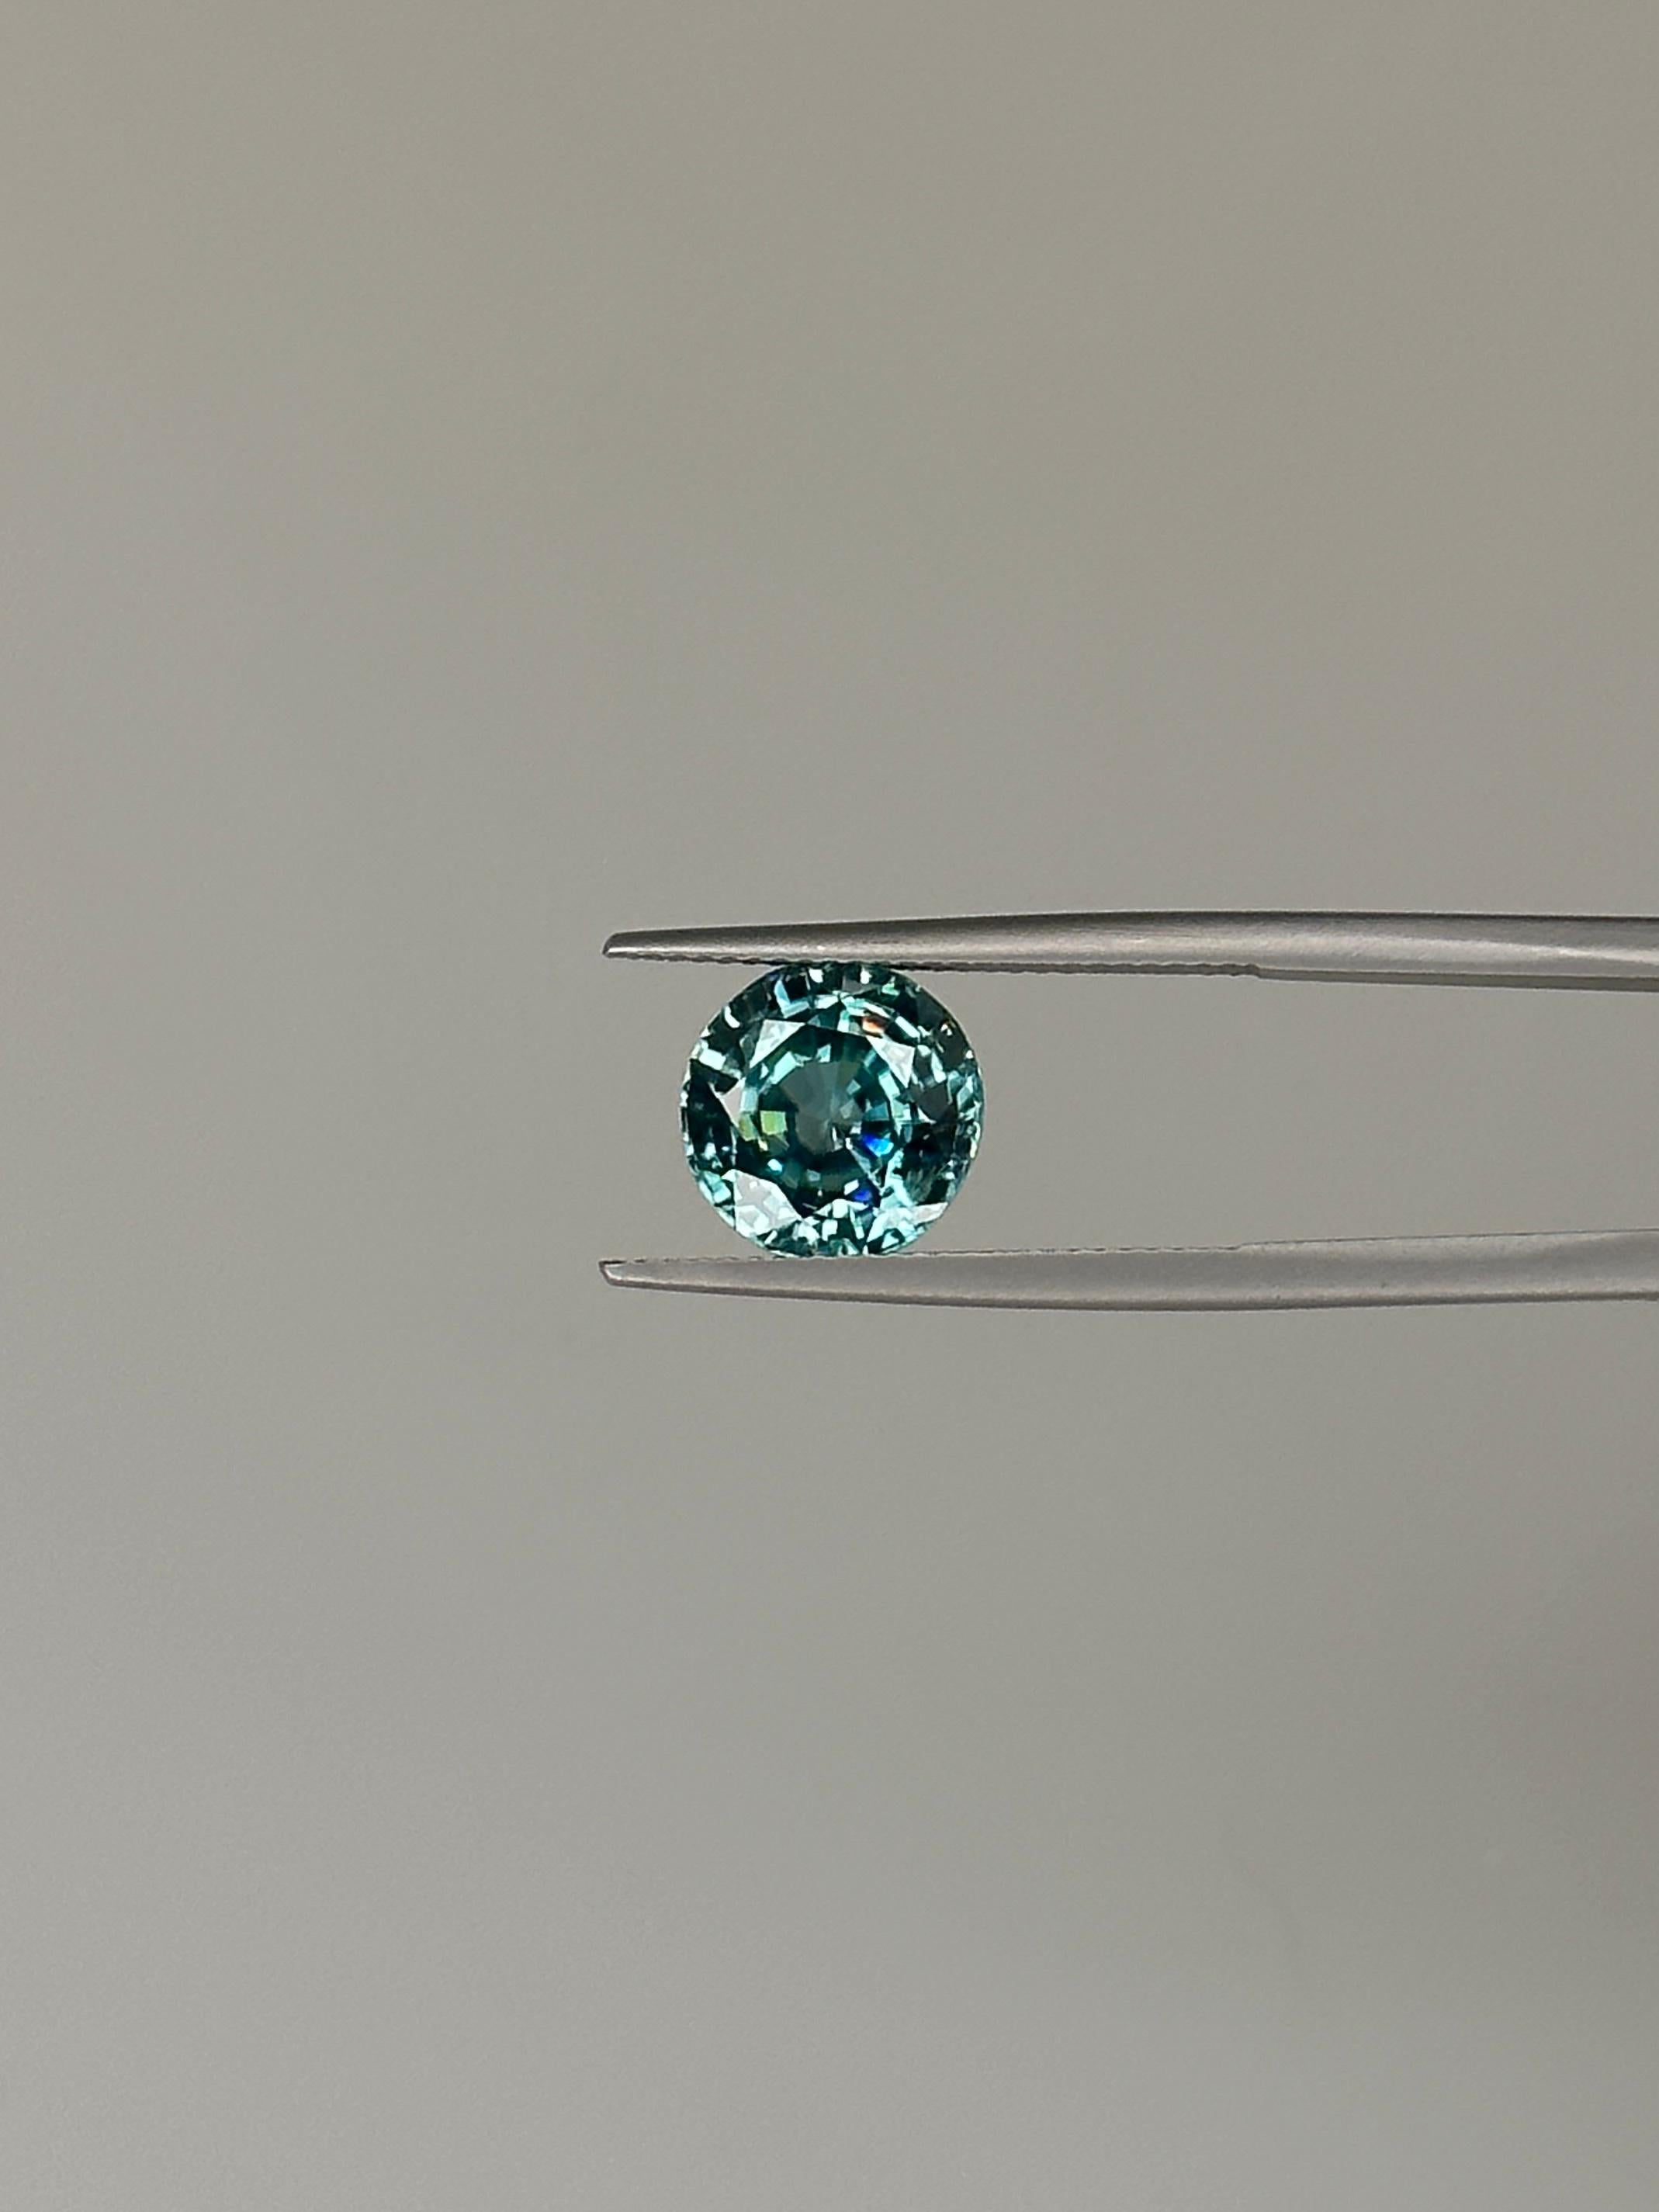 A beautiful sparkling Round-Cut 'Mint' Zircon from Ratanakiri, Cambodia.

Rare sparkling Blue Zircon is only found at one place in the world at Ratanakiri province in Northeast Cambodia. Blue Zircon in this vivid blue color is very rare indeed. We